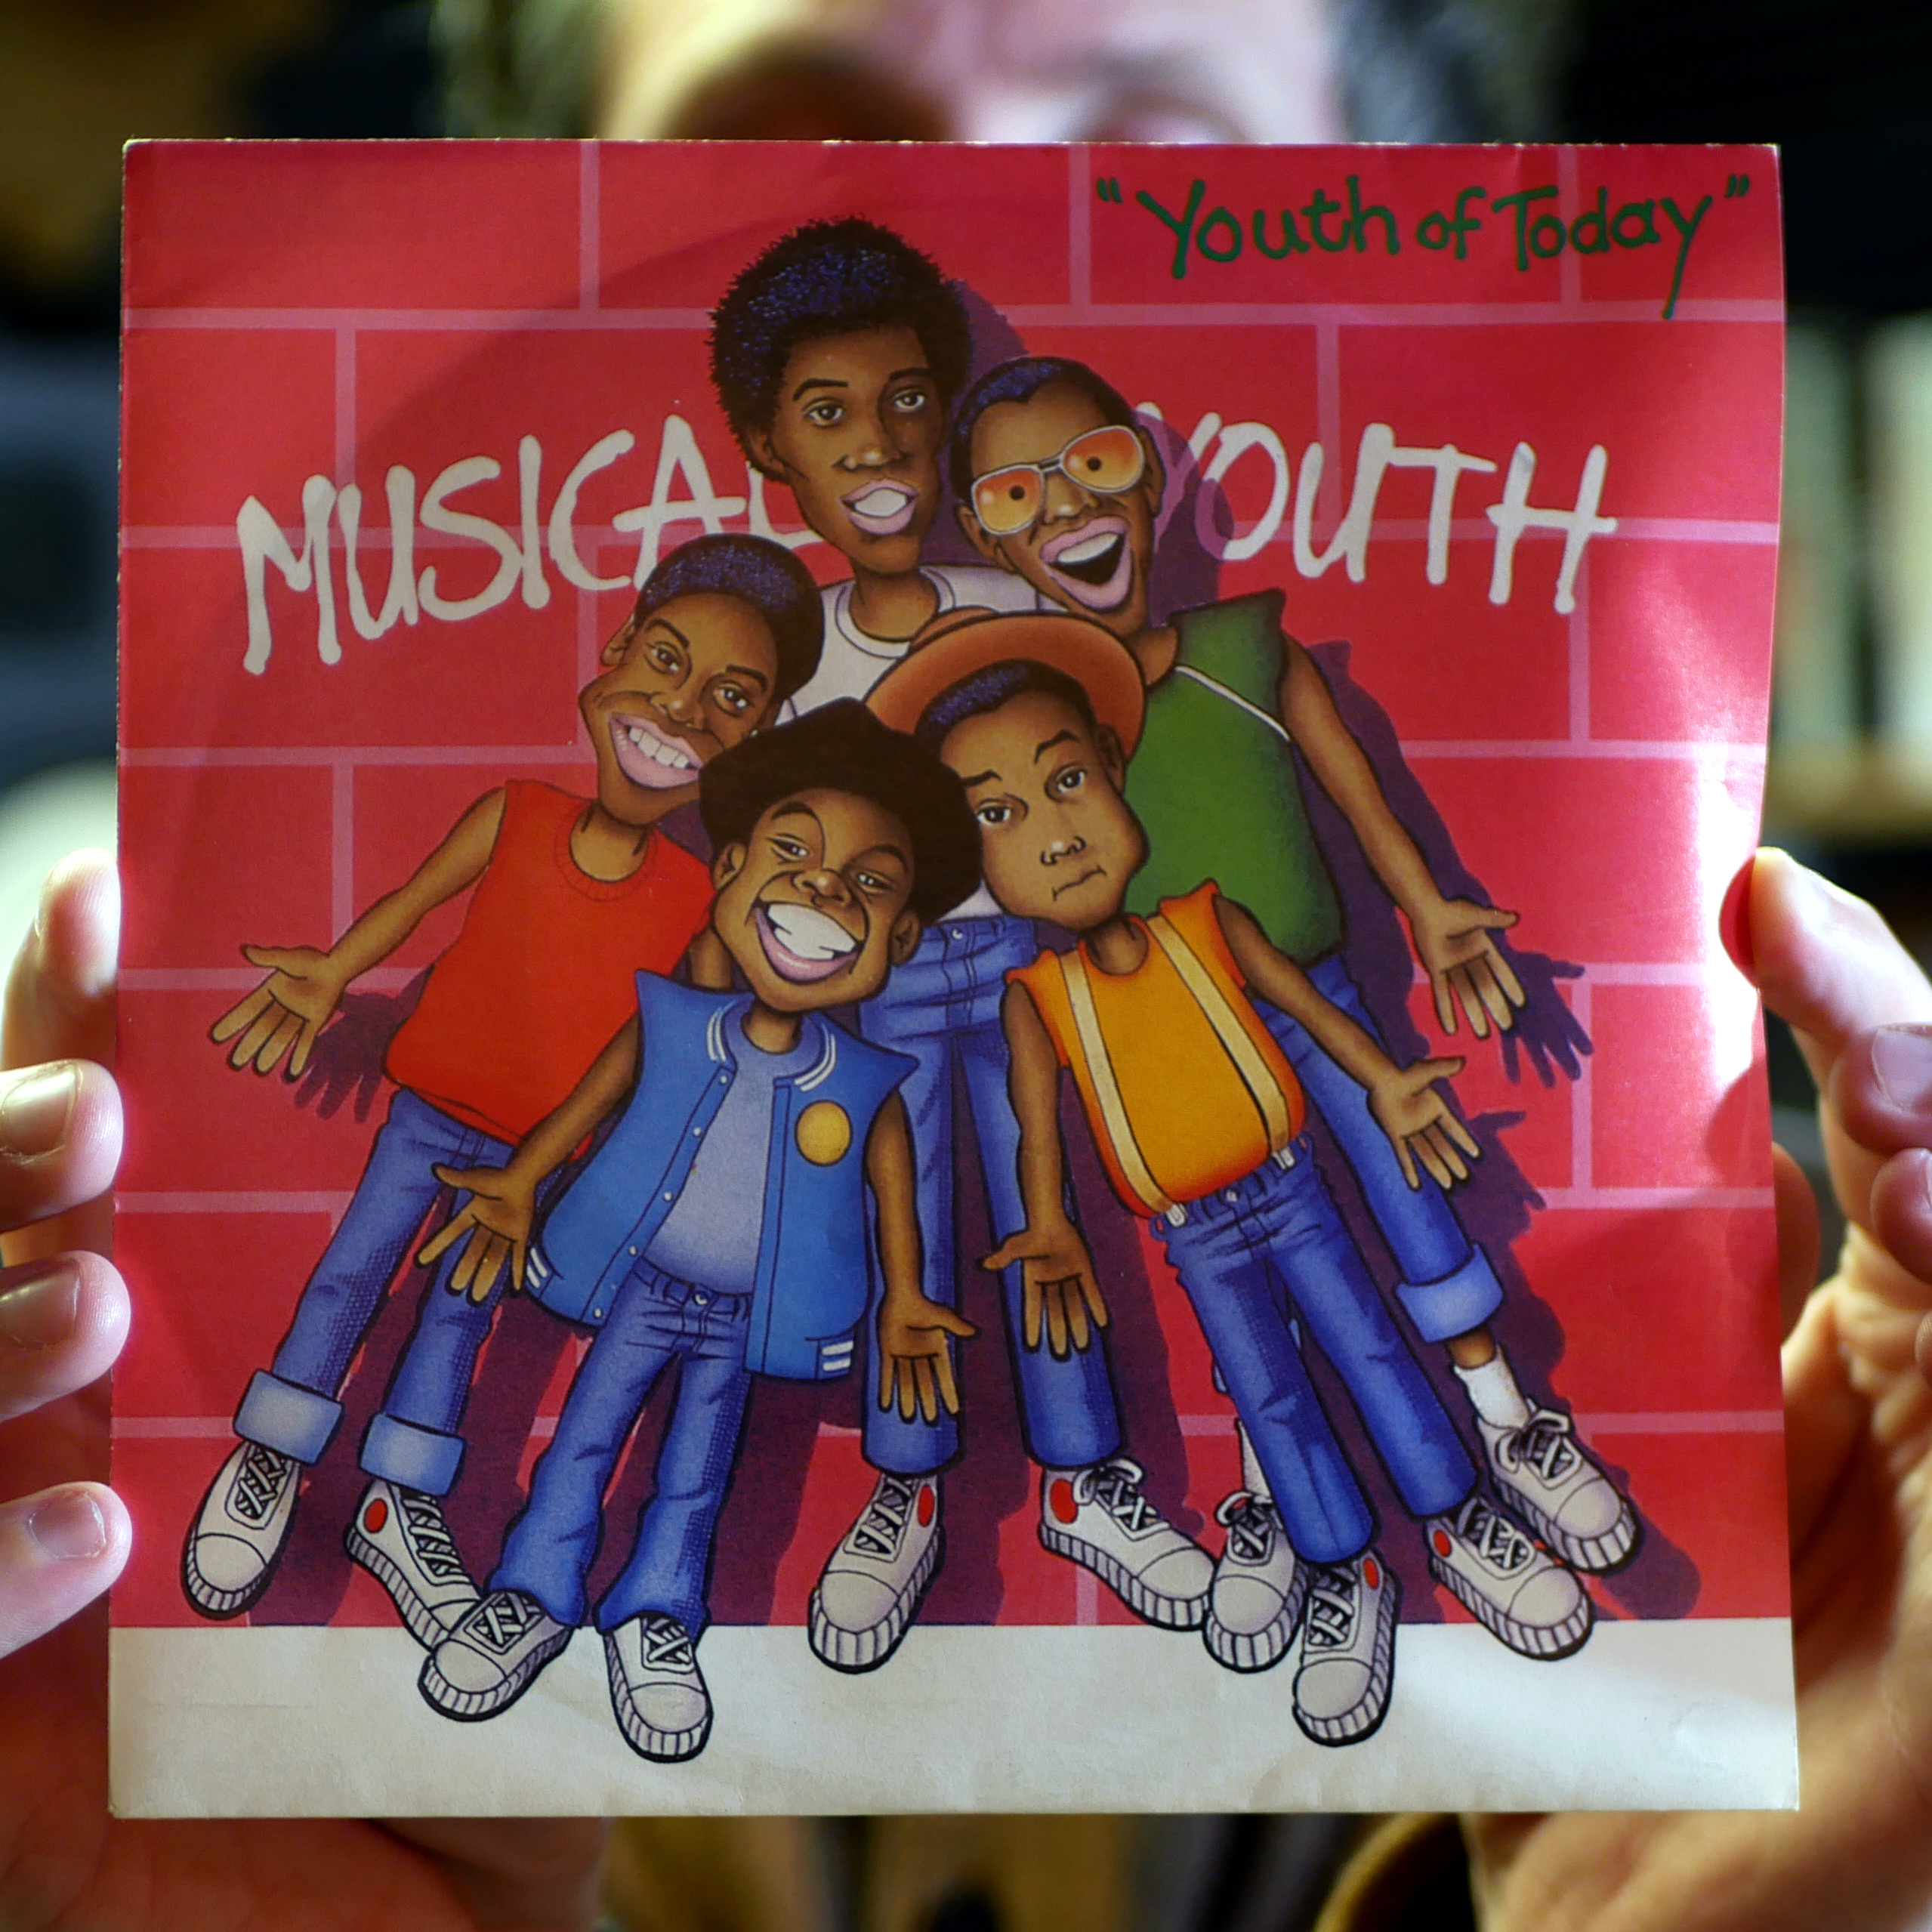 Musical Youth – Youth of Today [7", 1982]